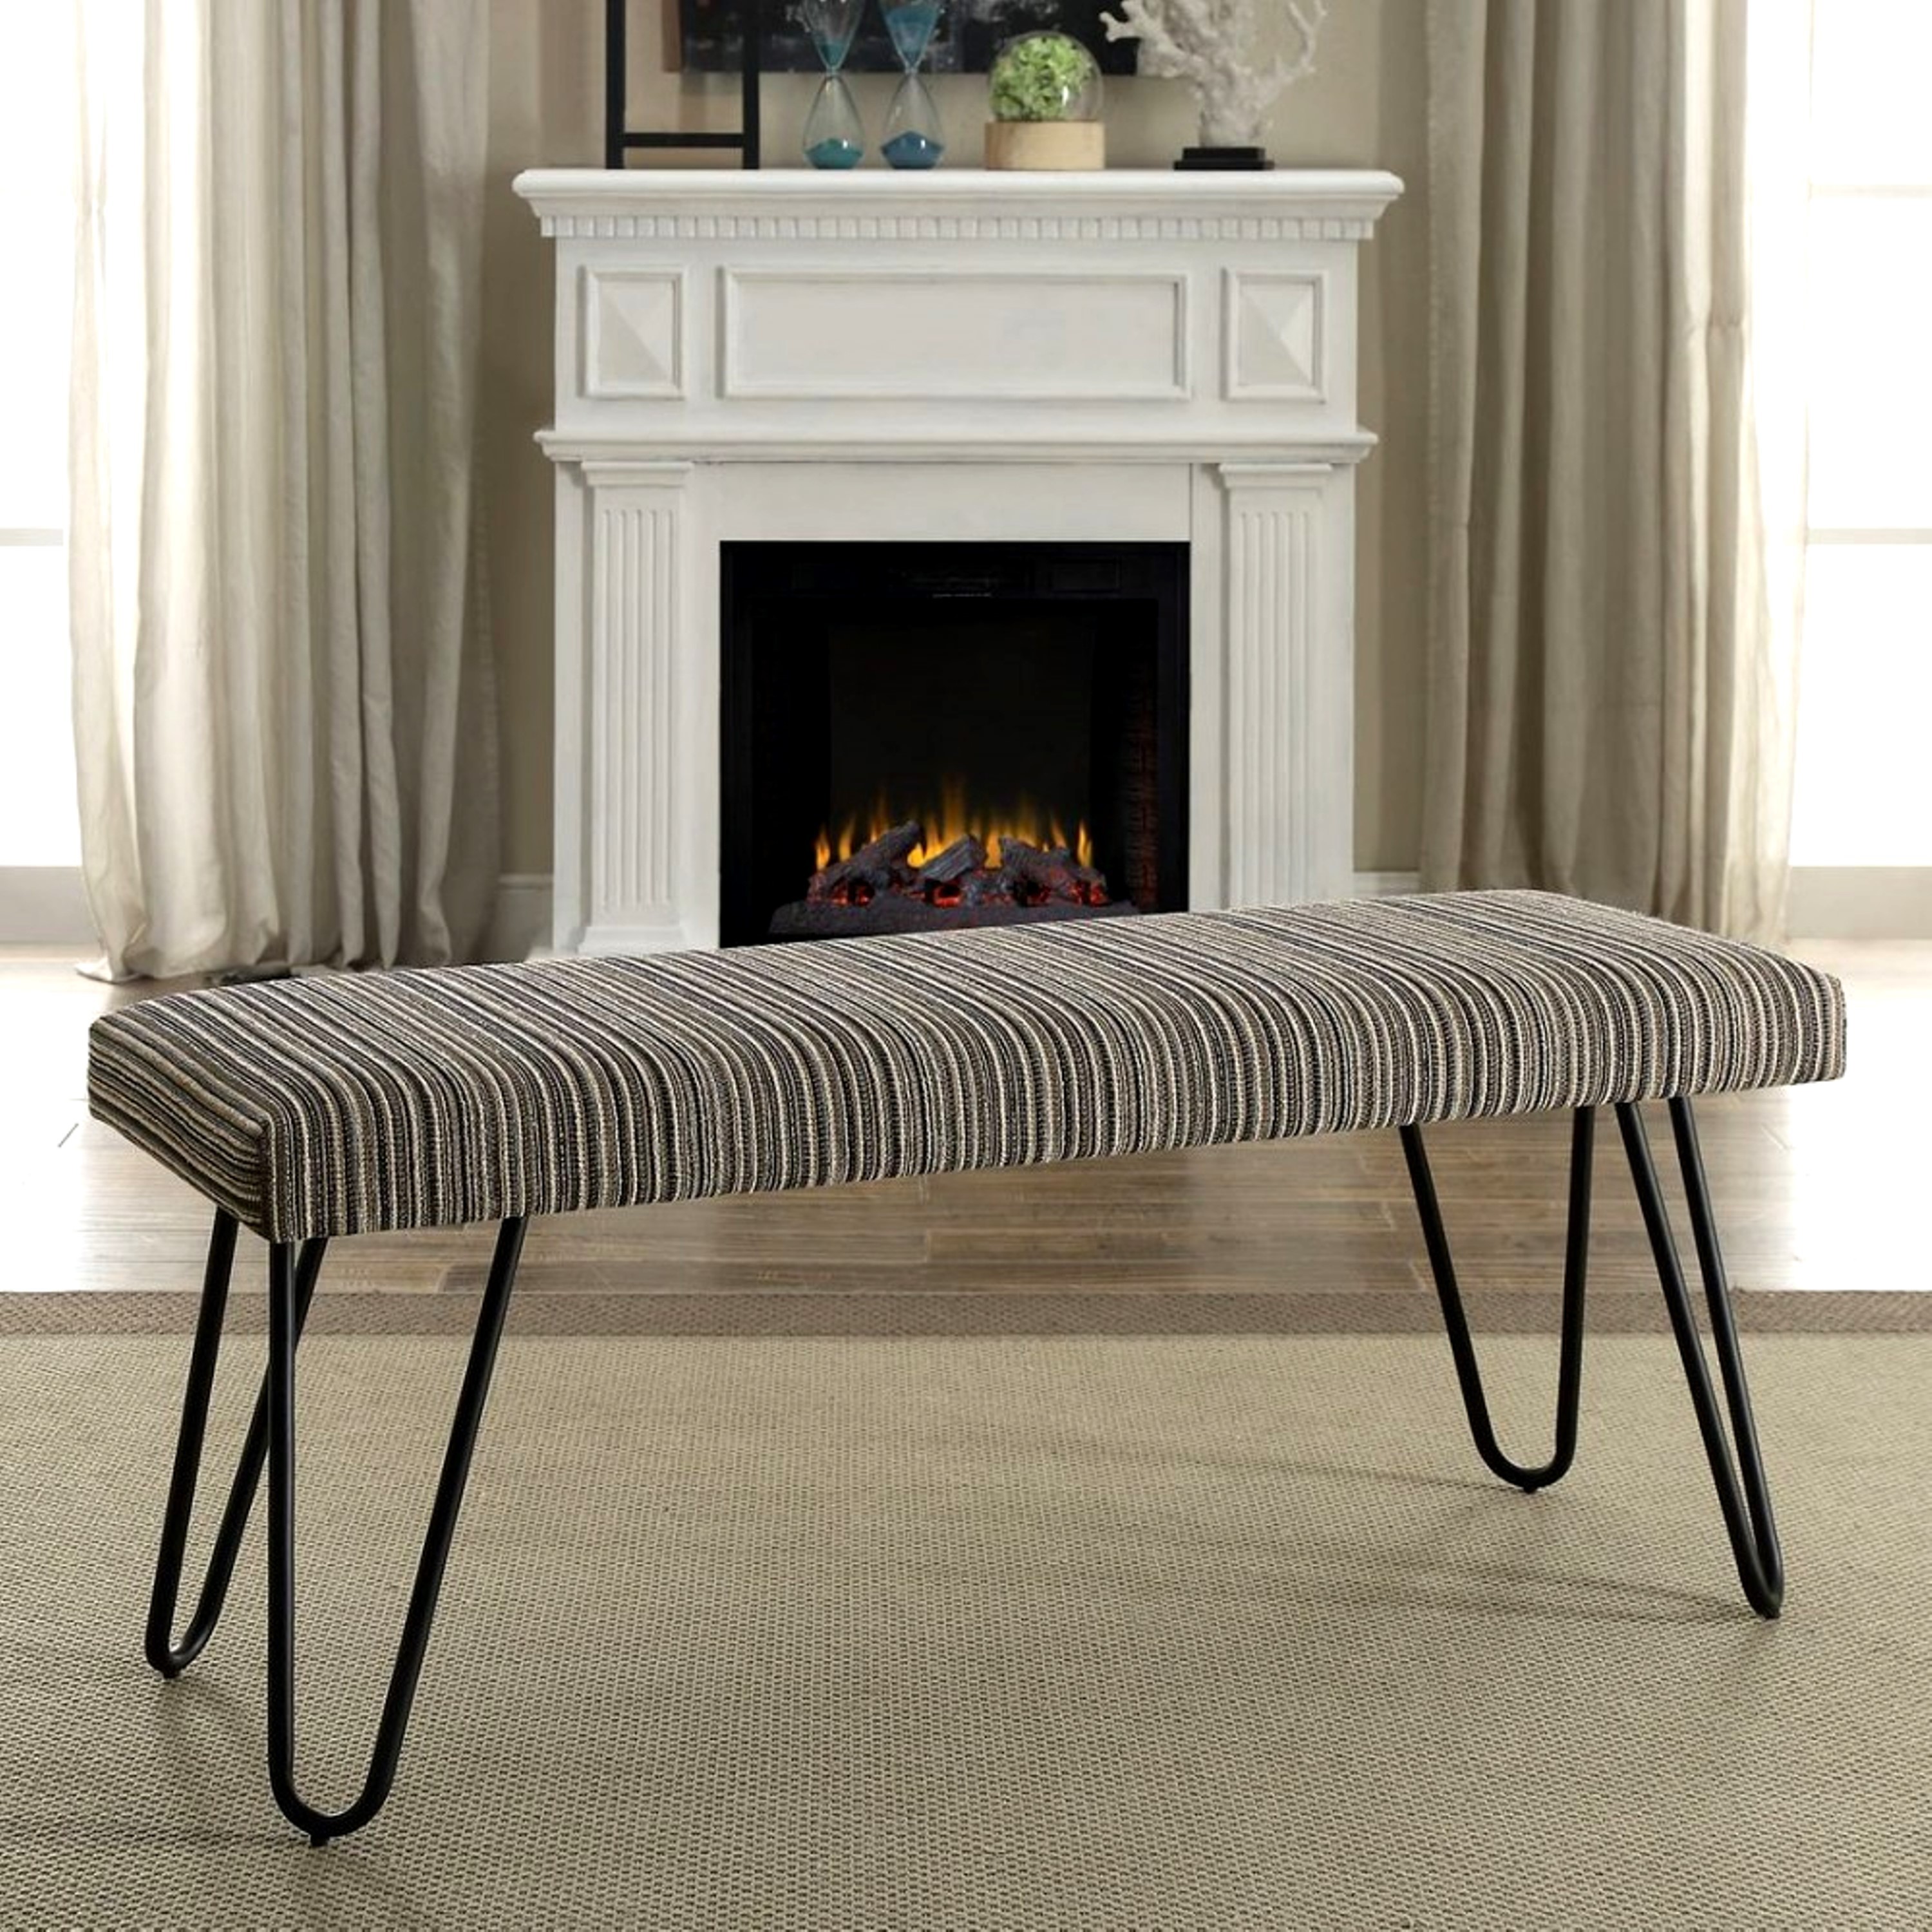 Mid Century Modern Multi Colored Living Room Accent Bench With Hairpin Legs Overstock 16899373